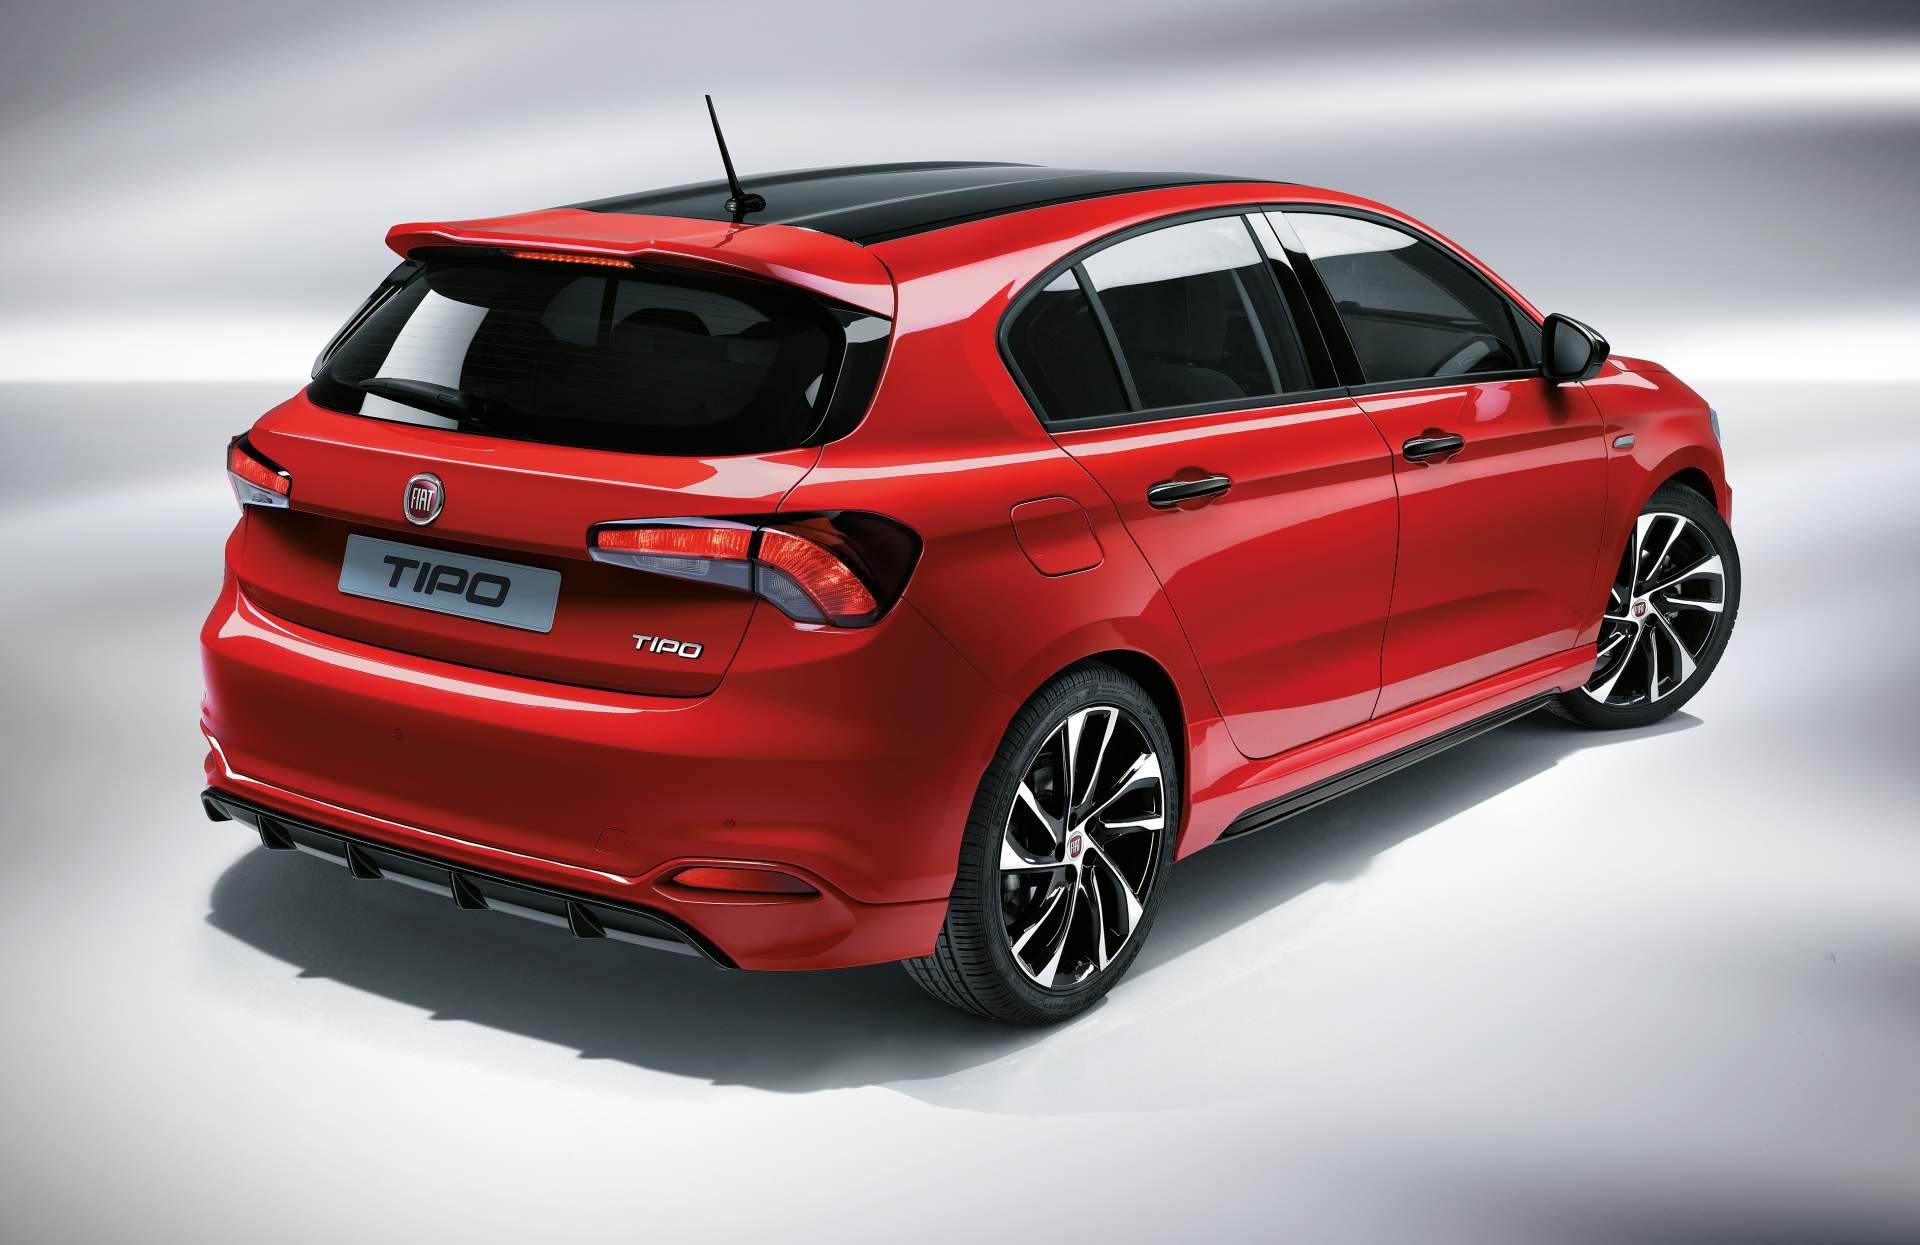 New Fiat Tipo Sport Is The Compact's All-Show And No-Go Range-Topper